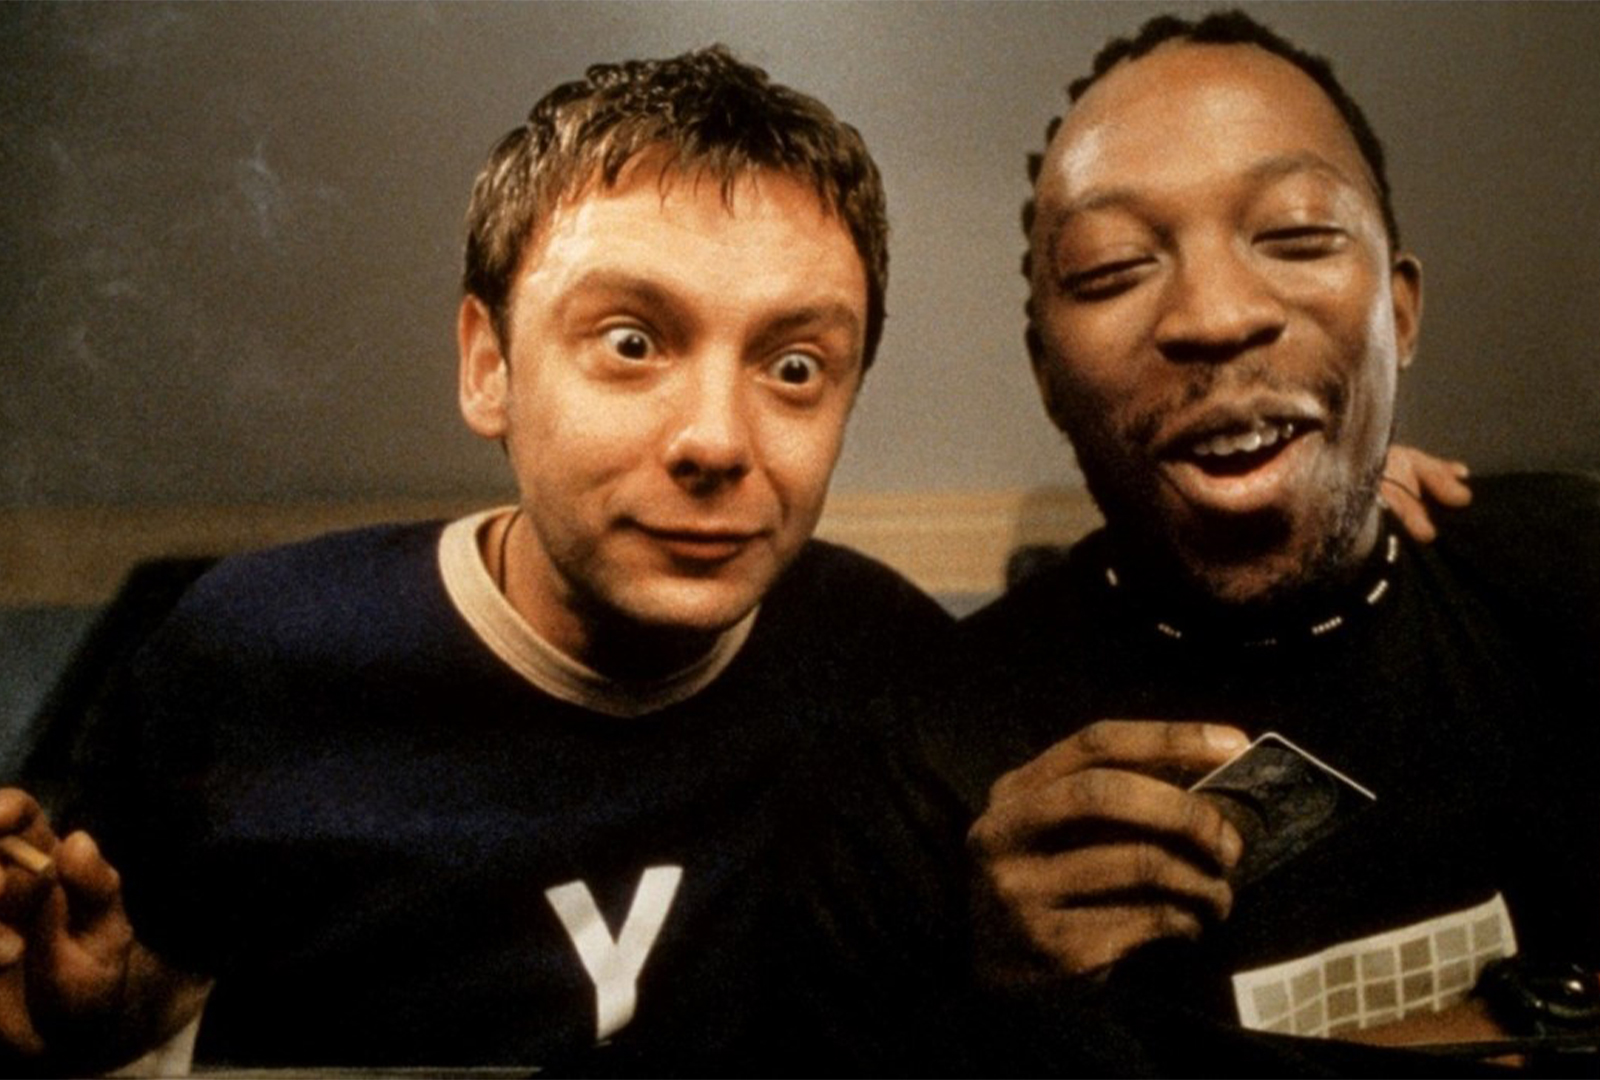 Cult classic film Human Traffic to be restored in 4K – The Vinyl Factory